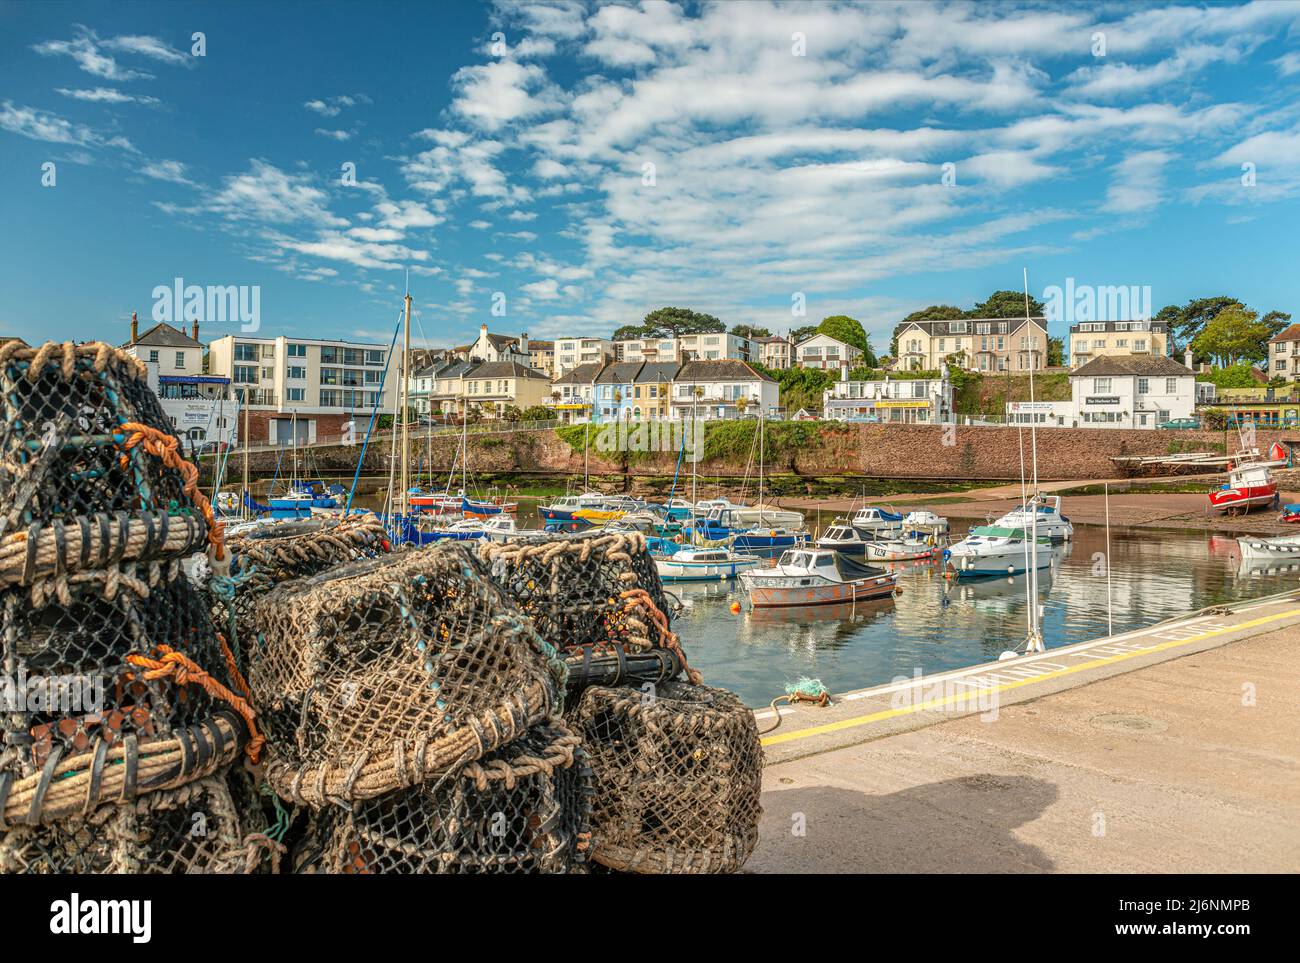 Lobster traps at the fishing harbour of Paignton, Torbay, Devon, England, UK Stock Photo